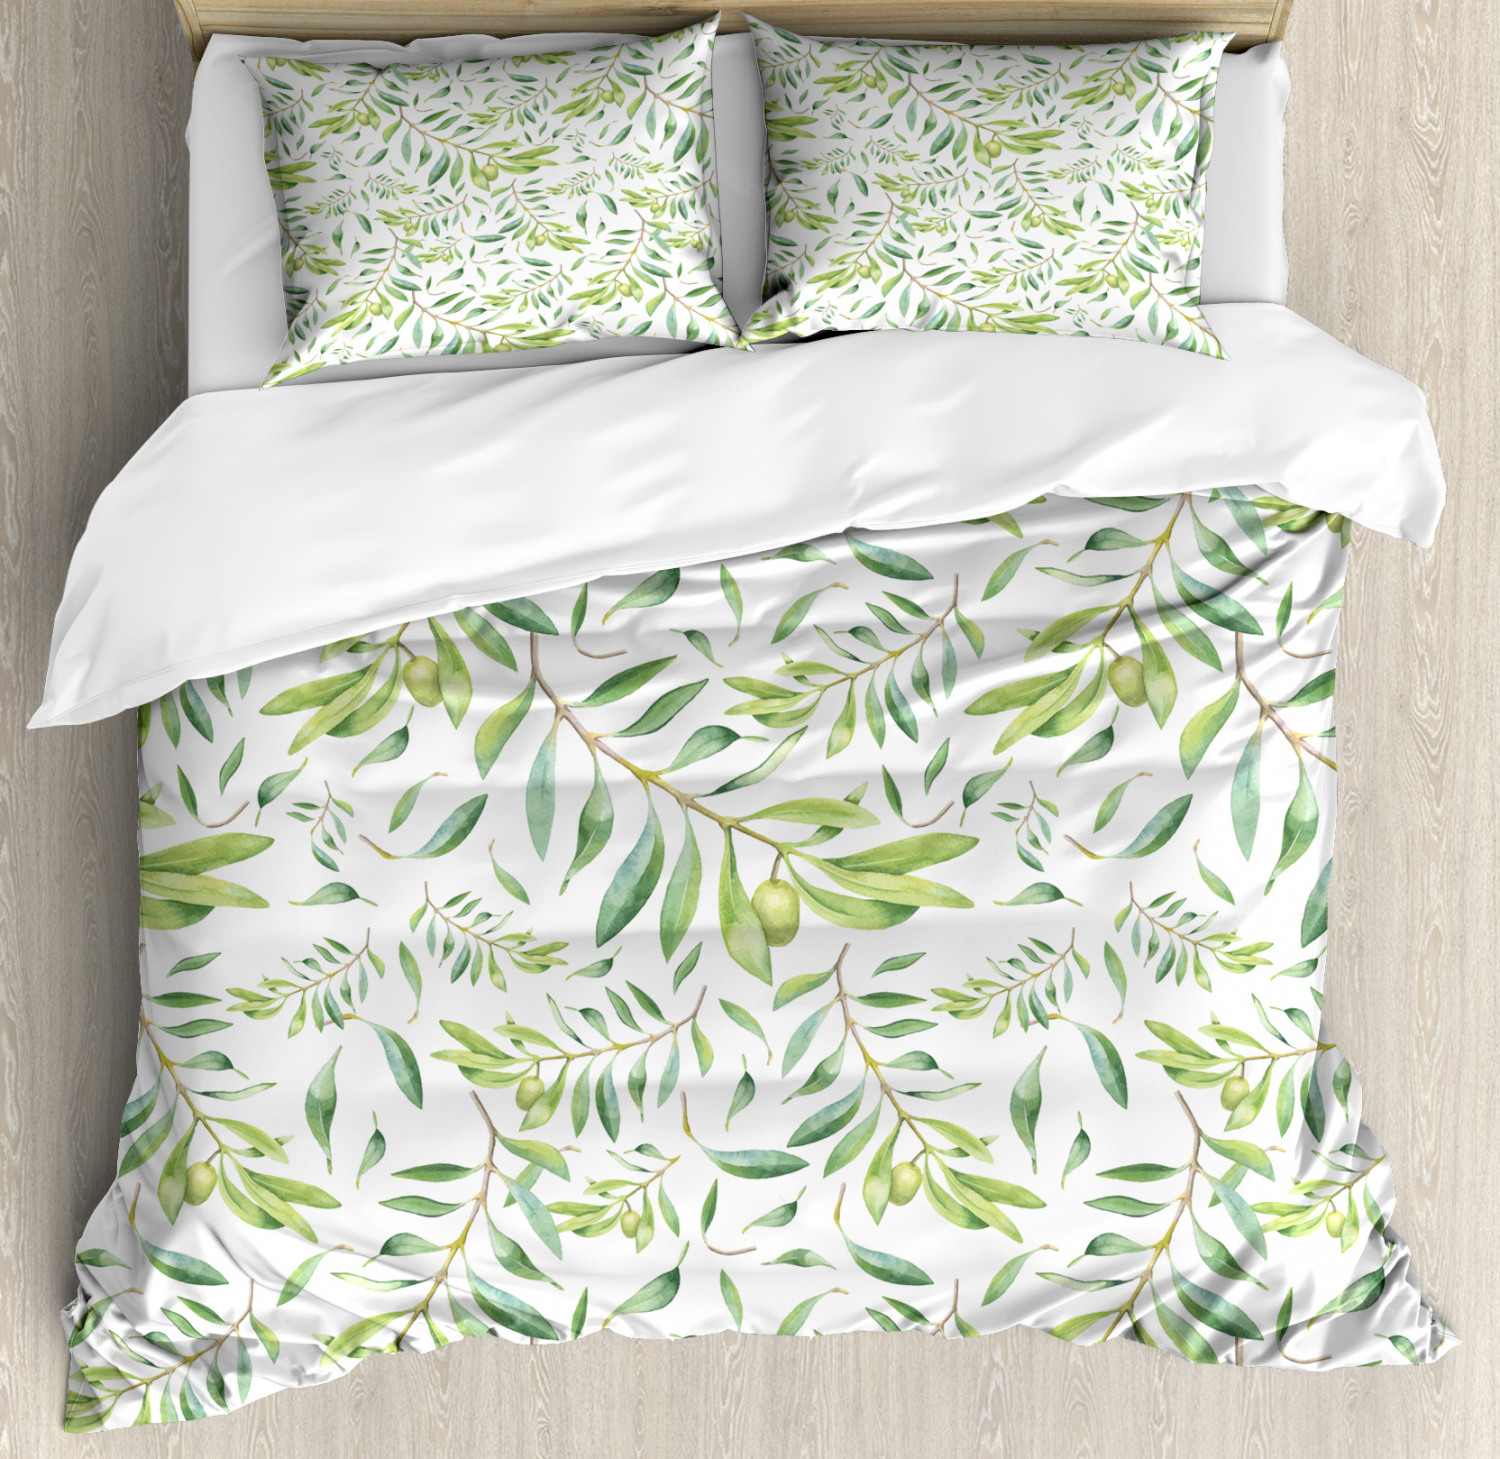 Green Leaf Duvet Cover Set With Pillow Shams Artistic Olive Tree